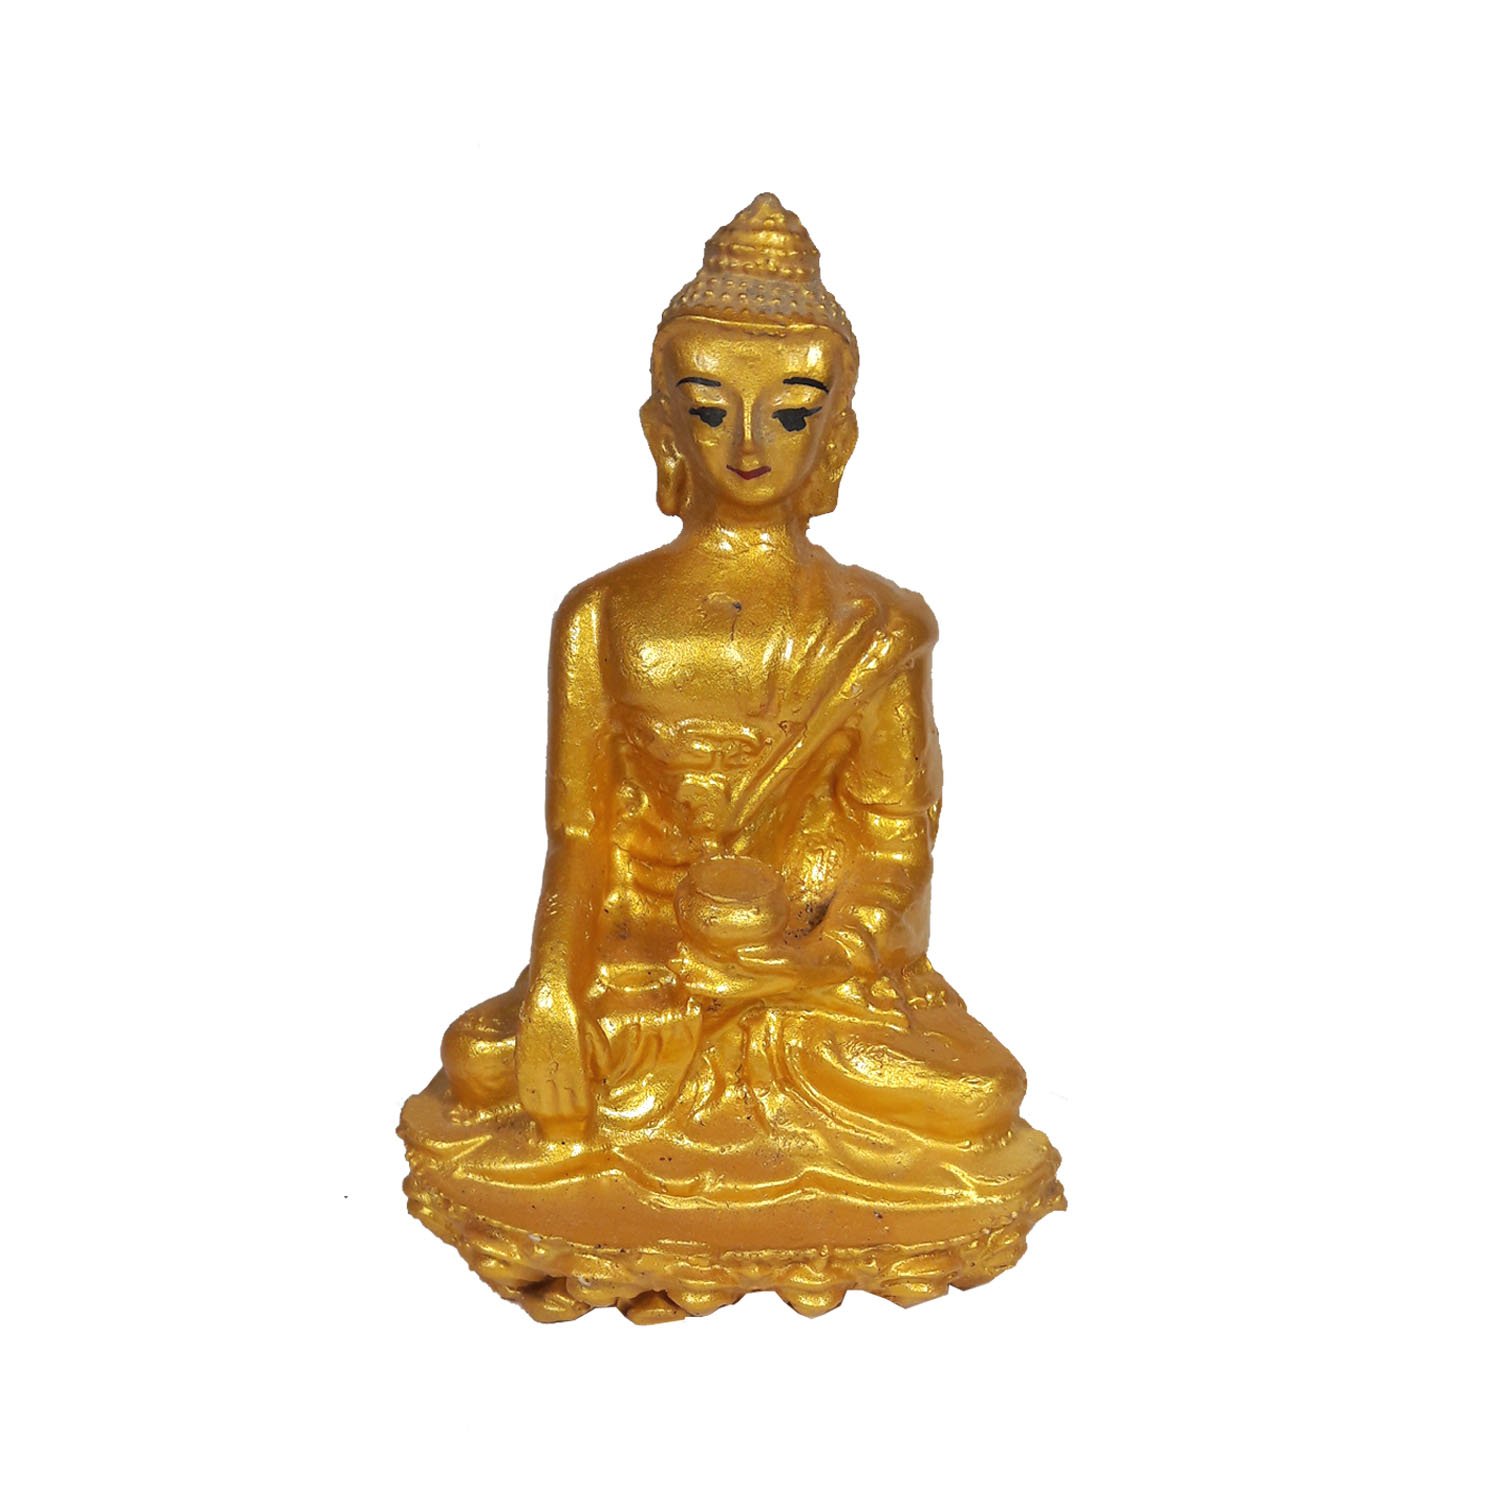 Golden Marble Lord Buddha Statue   5 INCH